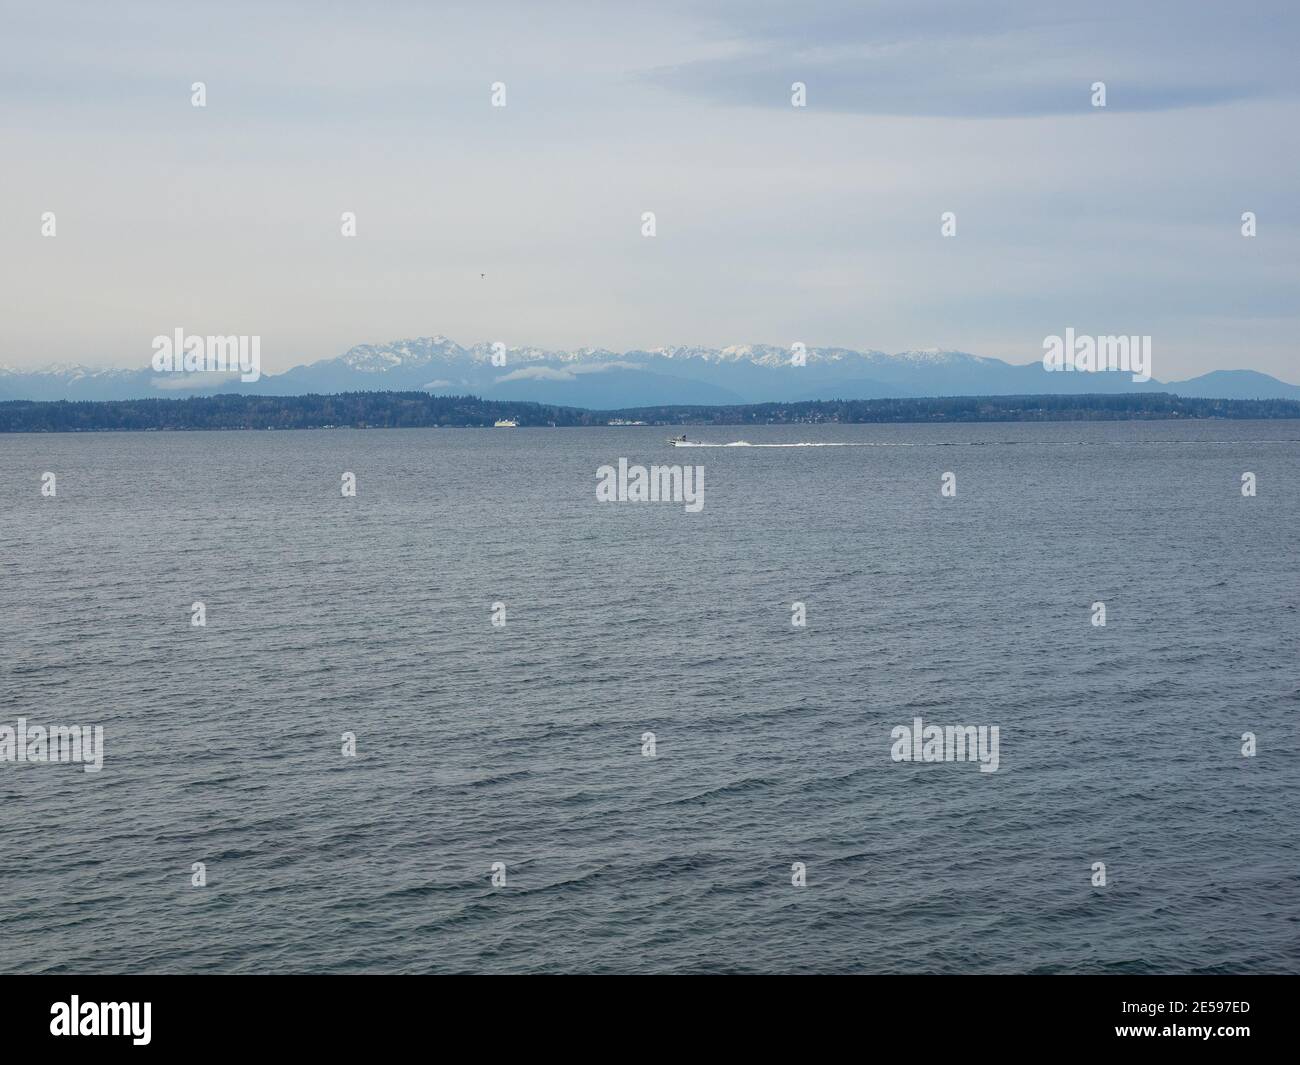 Alki Beach Park is a 135.9-acre (55.0 ha) park located in the West Seattle neighborhood of Seattle, Washington that consists of the Elliott Bay beach Stock Photo